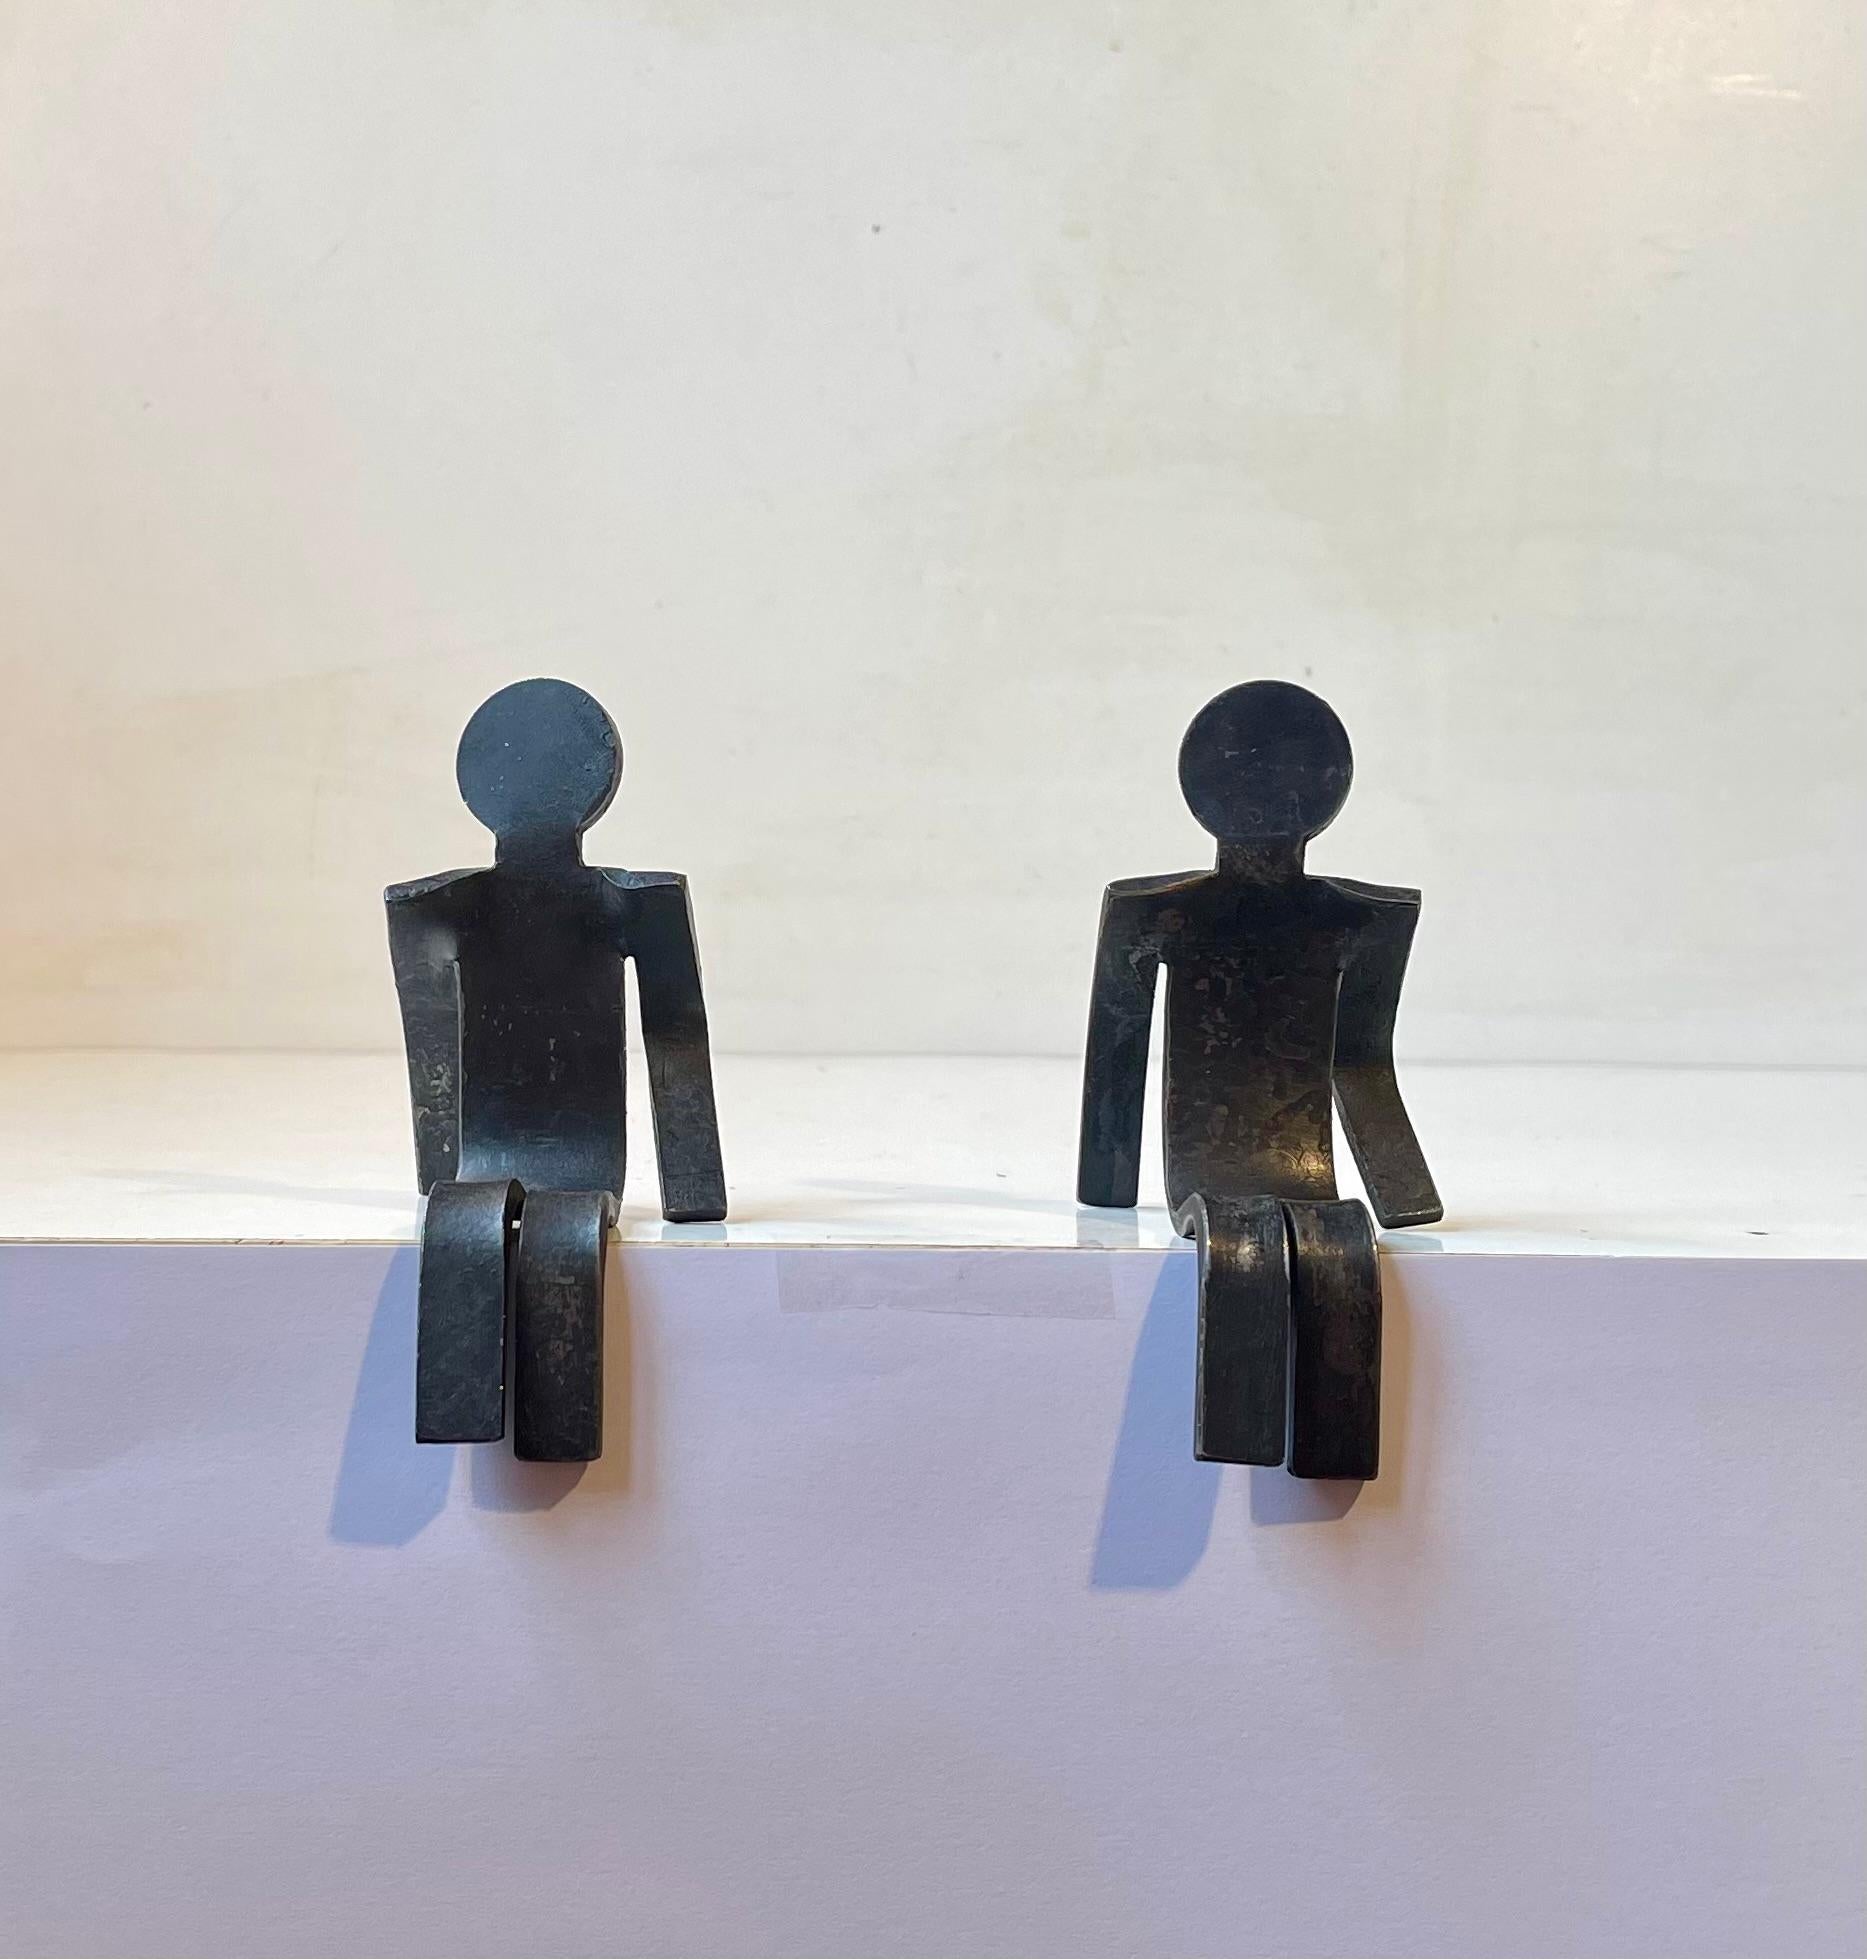 A pair of figural bookends in the shape of these bend steel figurines. Both of them signed/marked by an unknown. Postmodern in style - Memphis. Measurements: H: 8 cm (sitting), Dept: 10 cm, W: 6 cm. The price is for the set of 2.